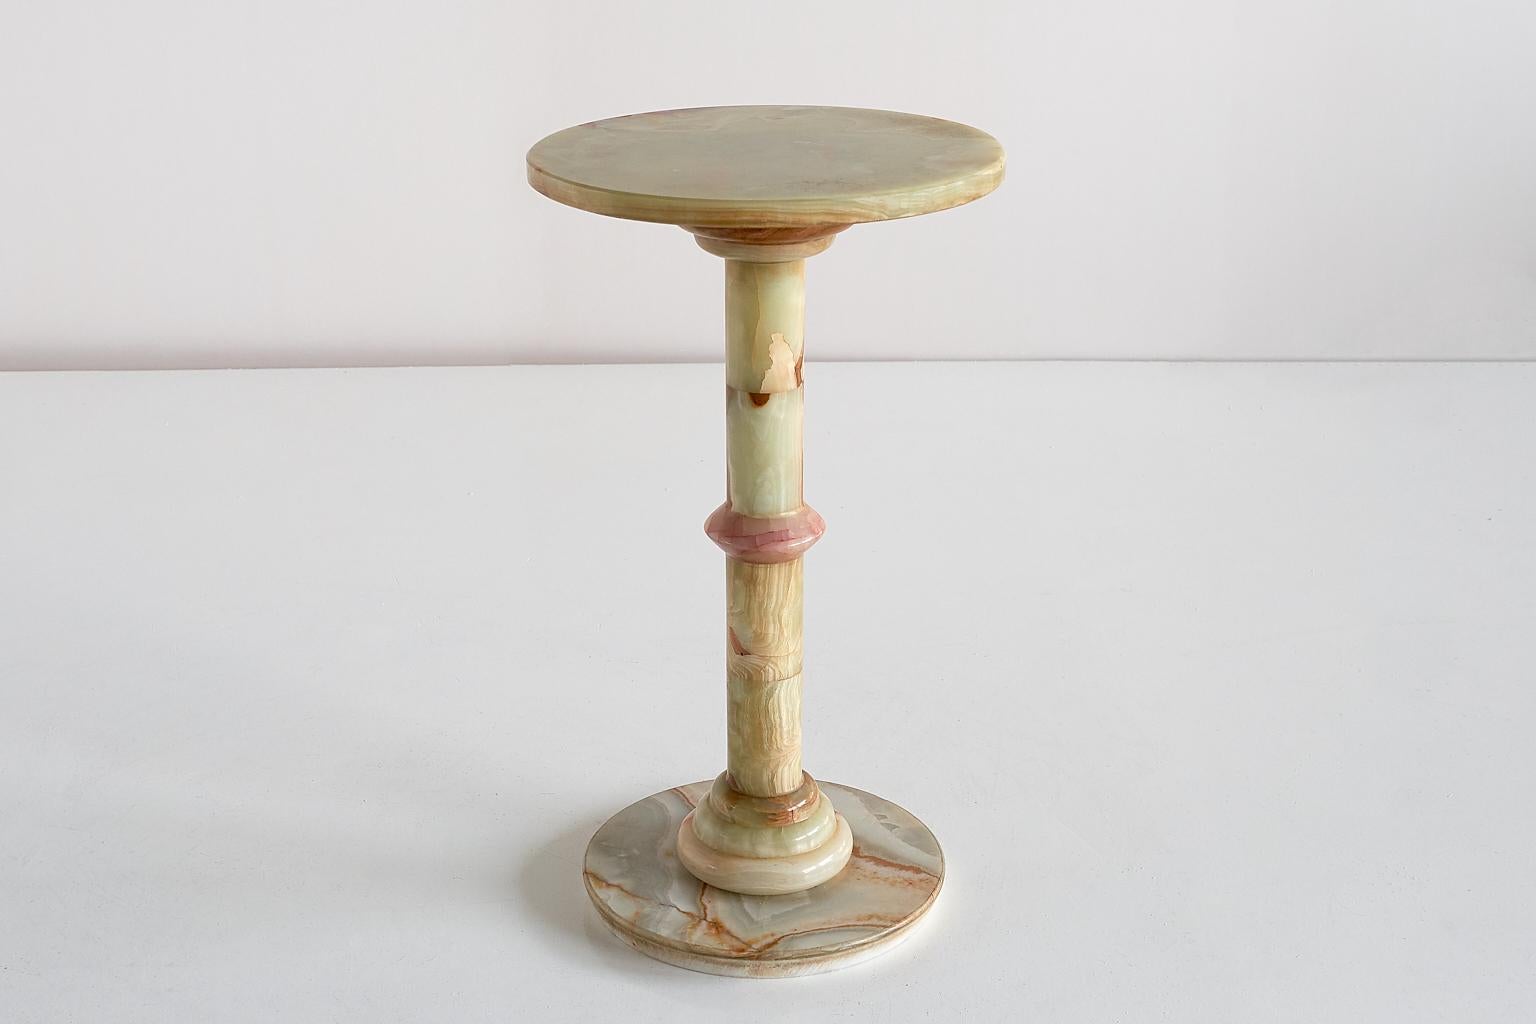 This elegant side table was produced in Italy in the 1960s. The pedestal base and top are all made of multicolored onyx. The different hues and intensitities of red, white and pastel green give the table a refined and striking appearance.